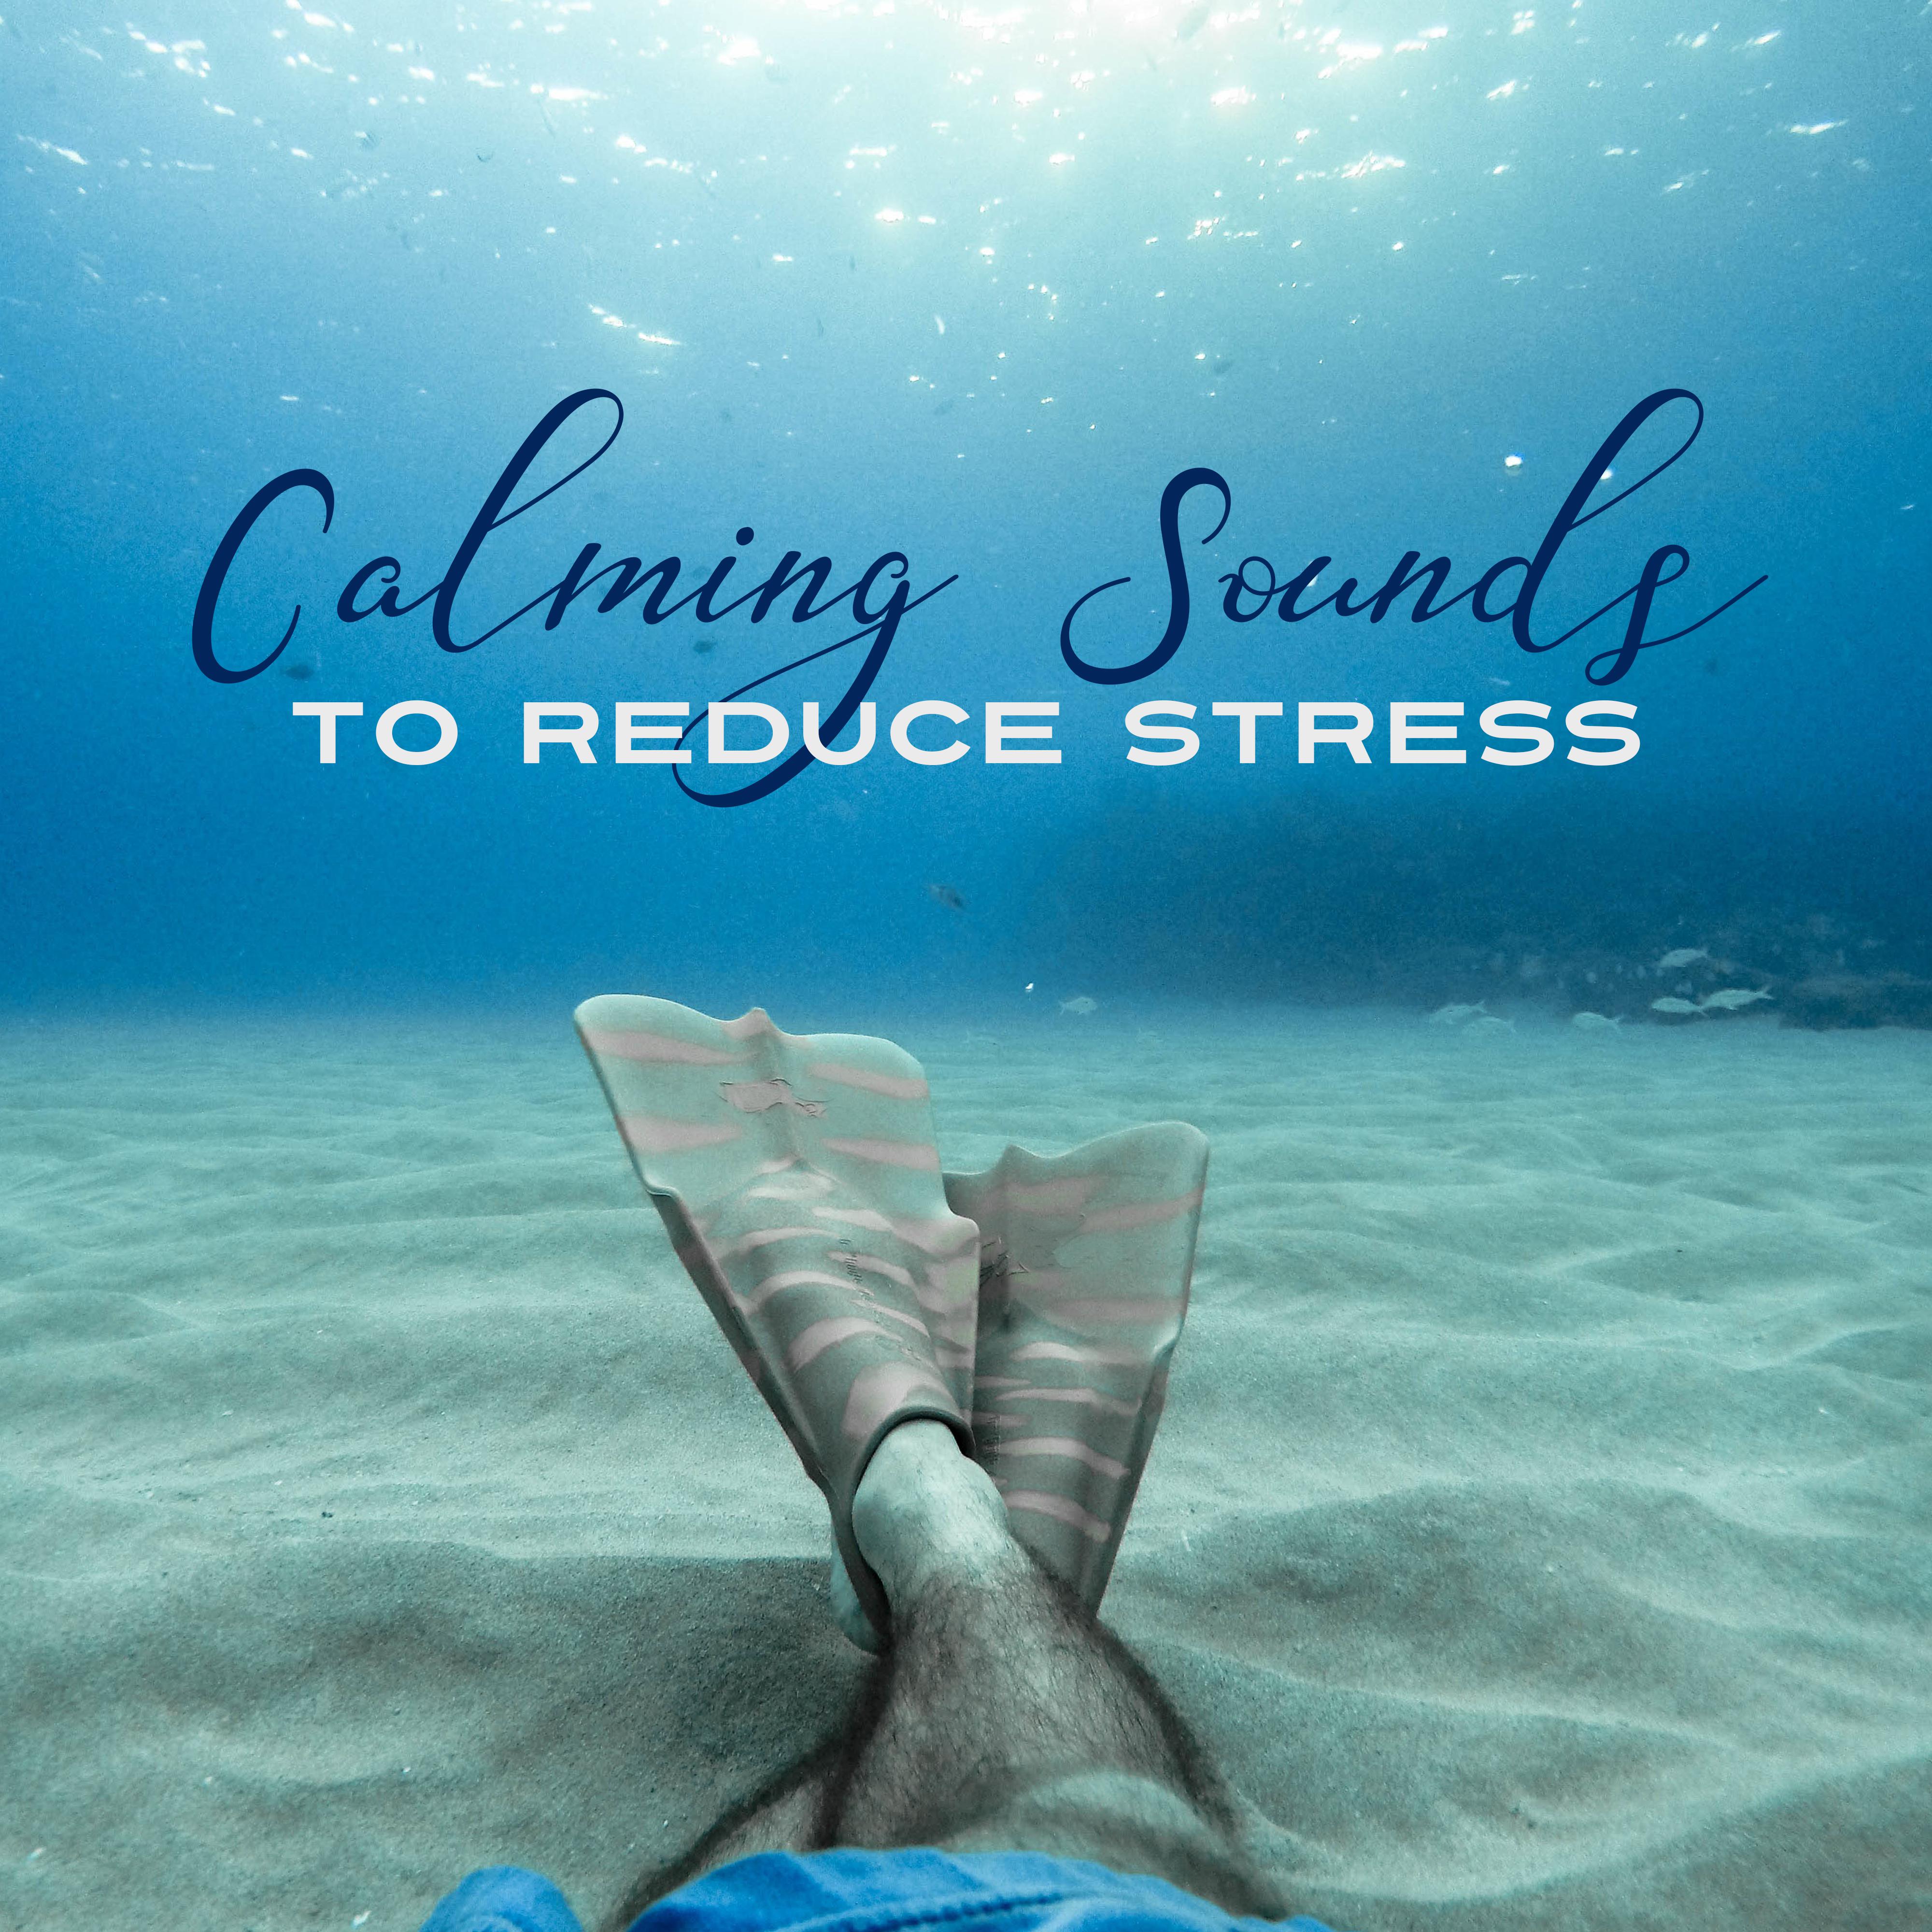 Calming Sounds to Reduce Stress – New Age Music, Free Your Mind, Rest a Bit, Brain Calmness